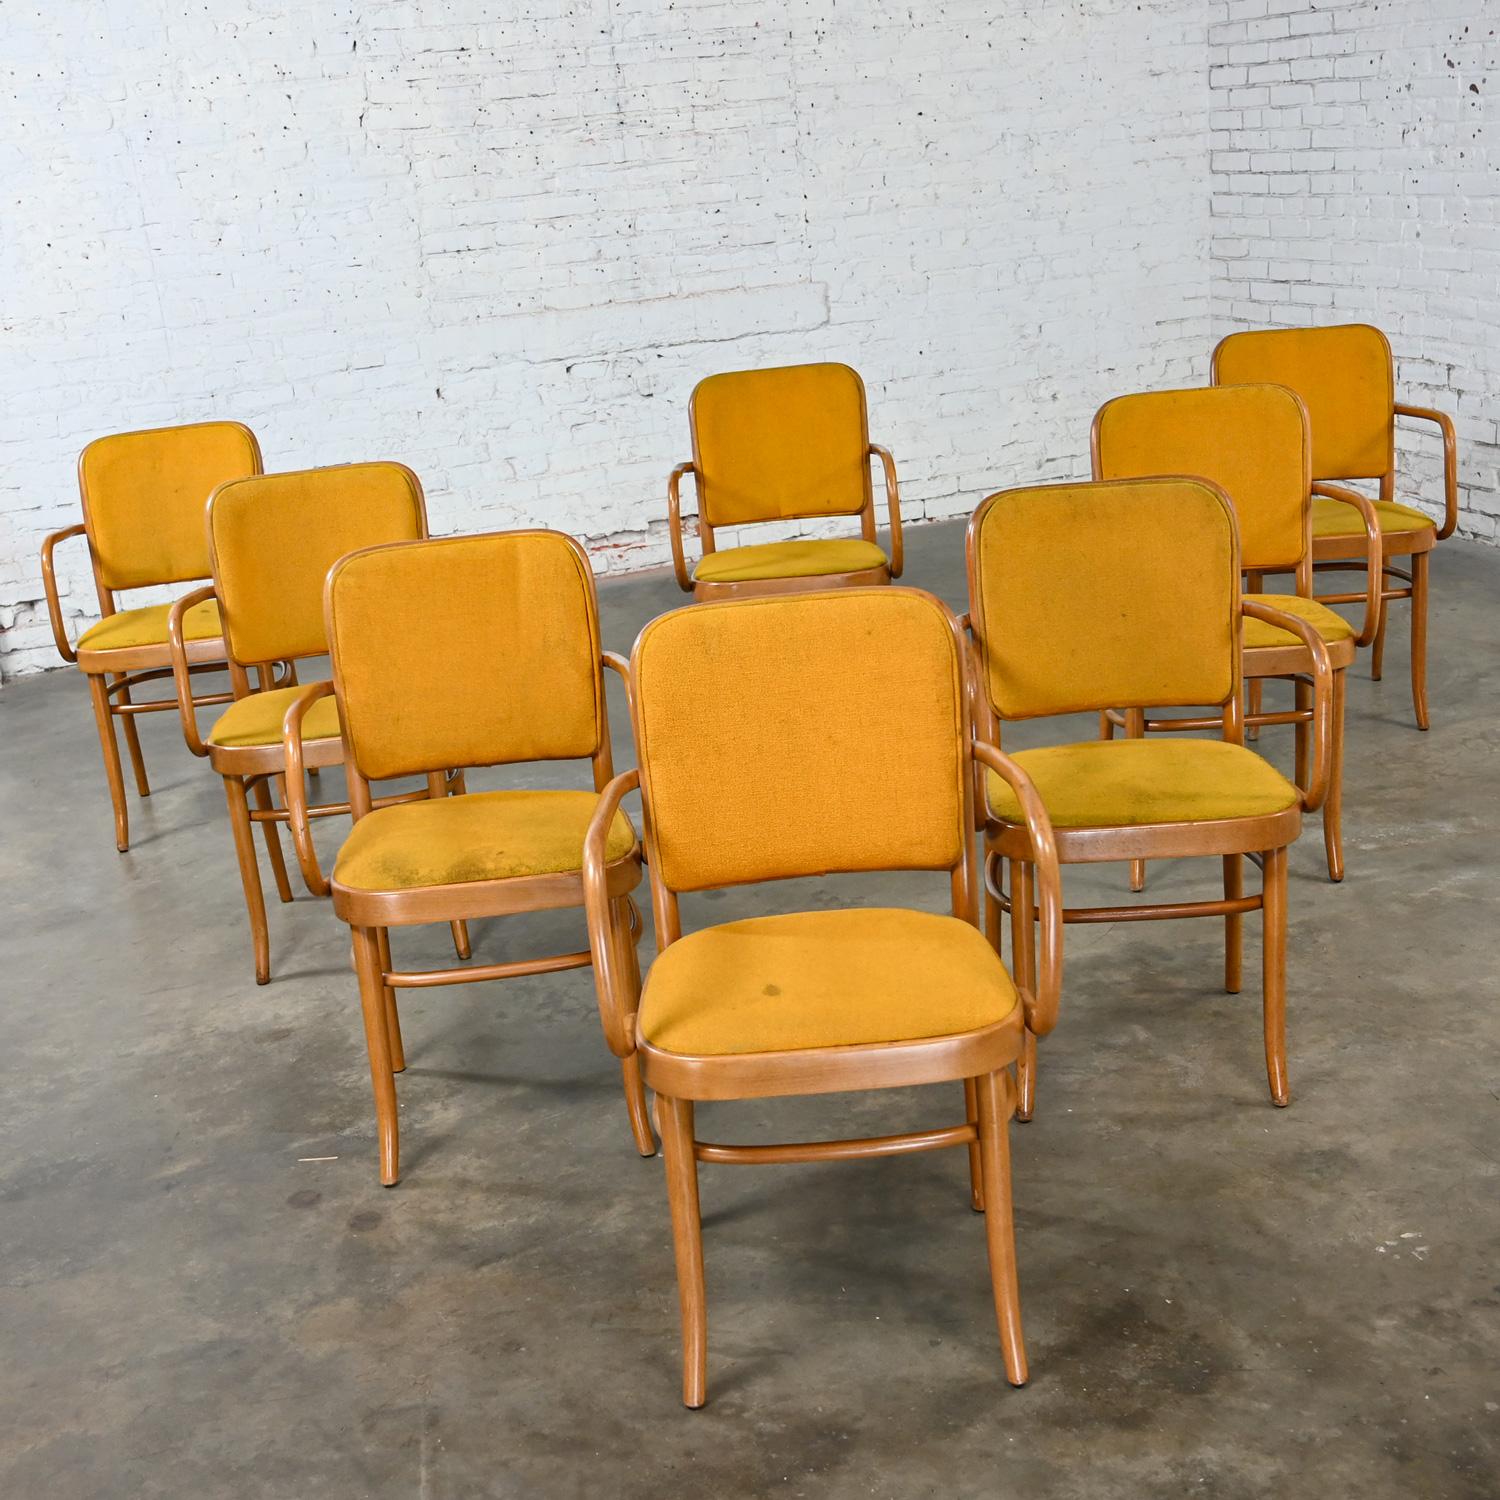 Wonderful vintage Bauhaus beech bentwood frame Thonet Josef Hoffman Prague 811 style armed dining chairs by Falcon Products Inc., Set of 8. Beautiful condition, keeping in mind that these are vintage and not new so will have signs of use and wear